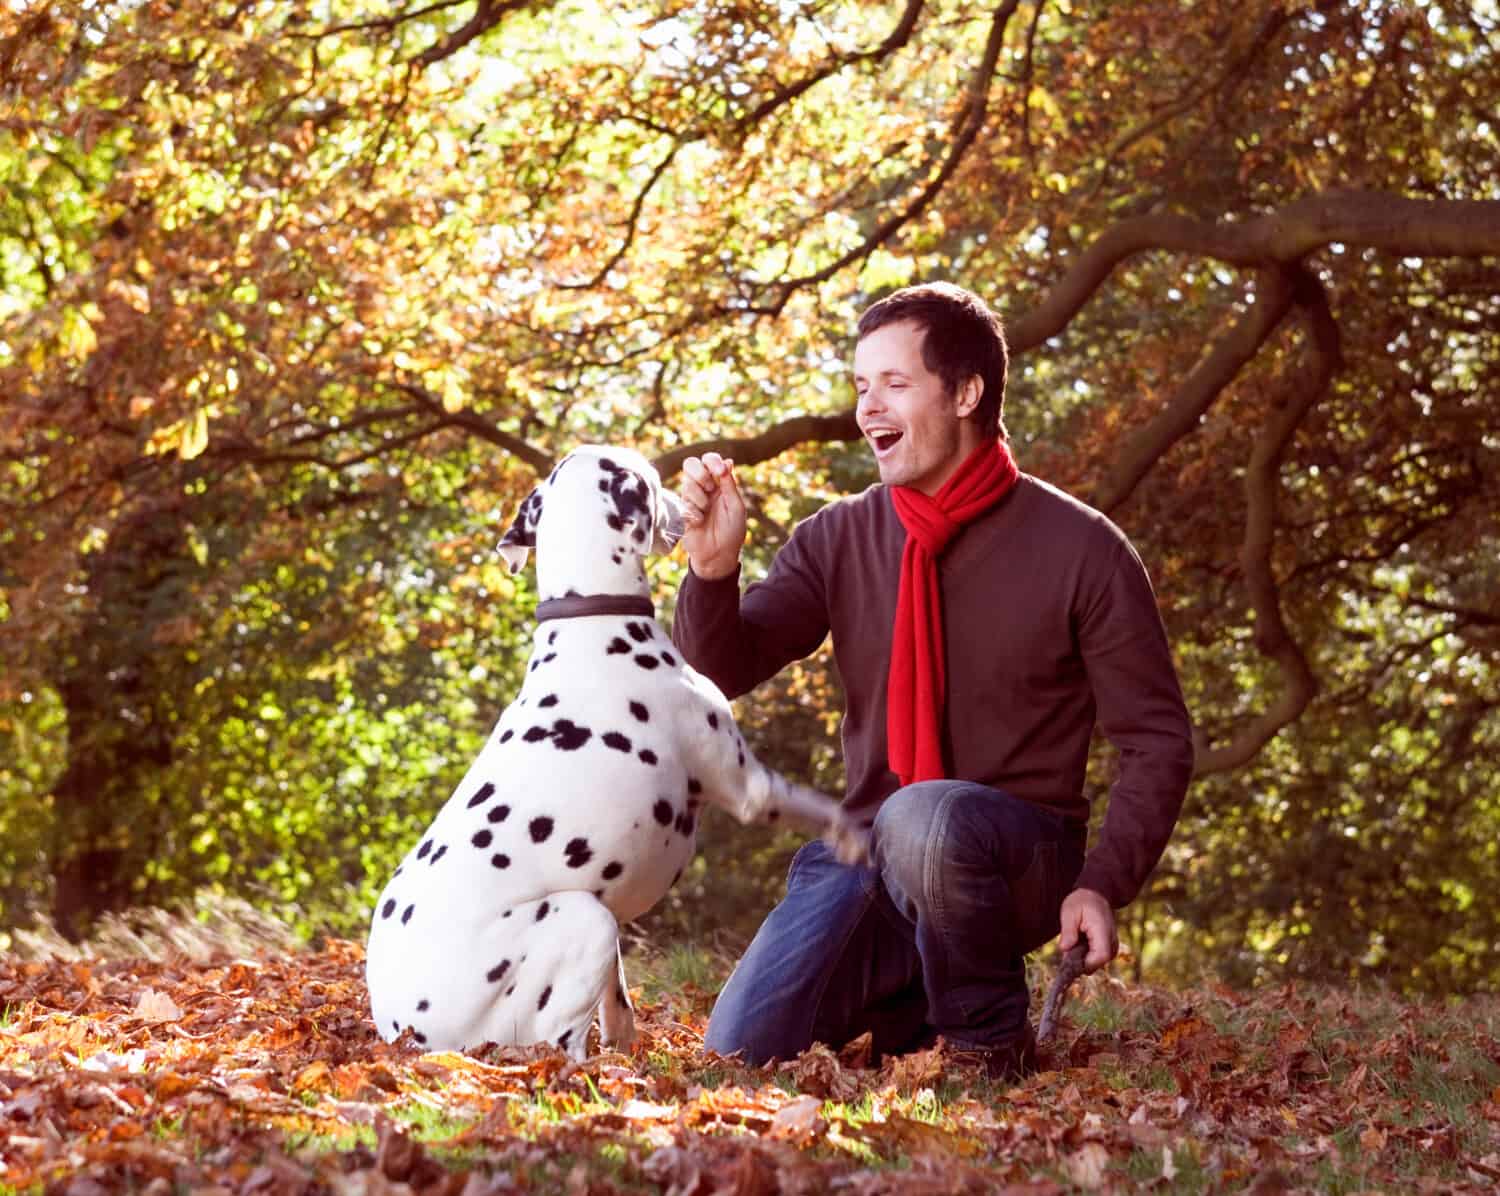 Man playing with pet dalmatian dog on walk in autumn woods